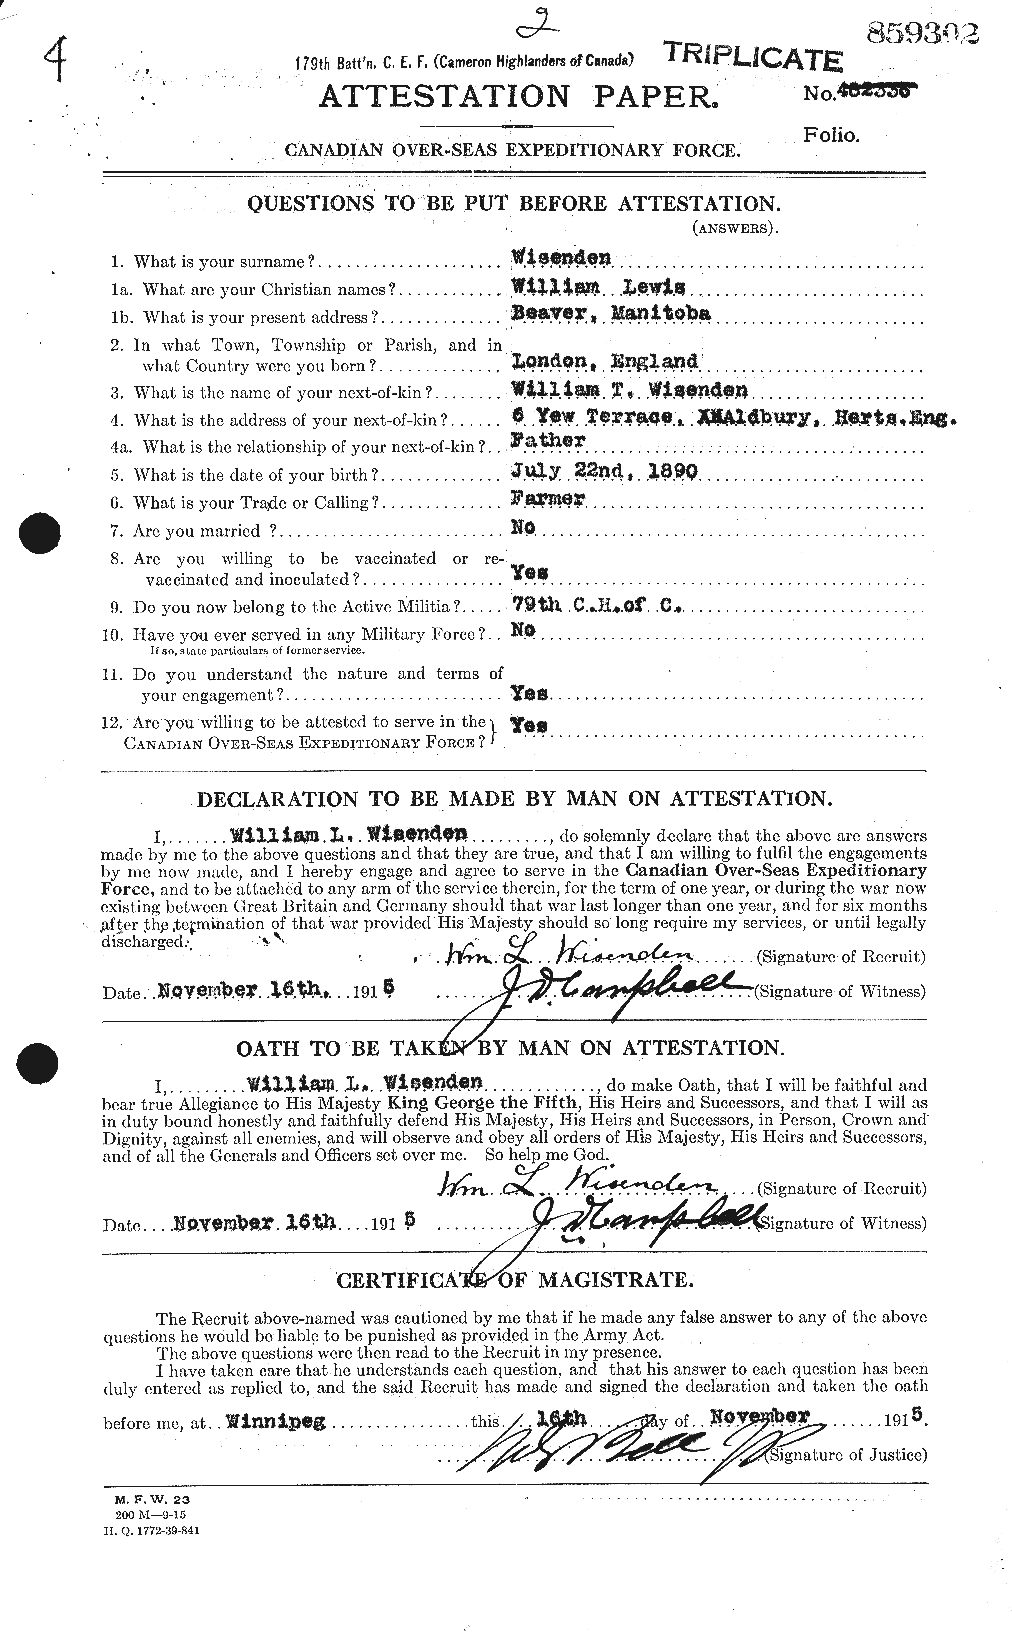 Personnel Records of the First World War - CEF 679745a